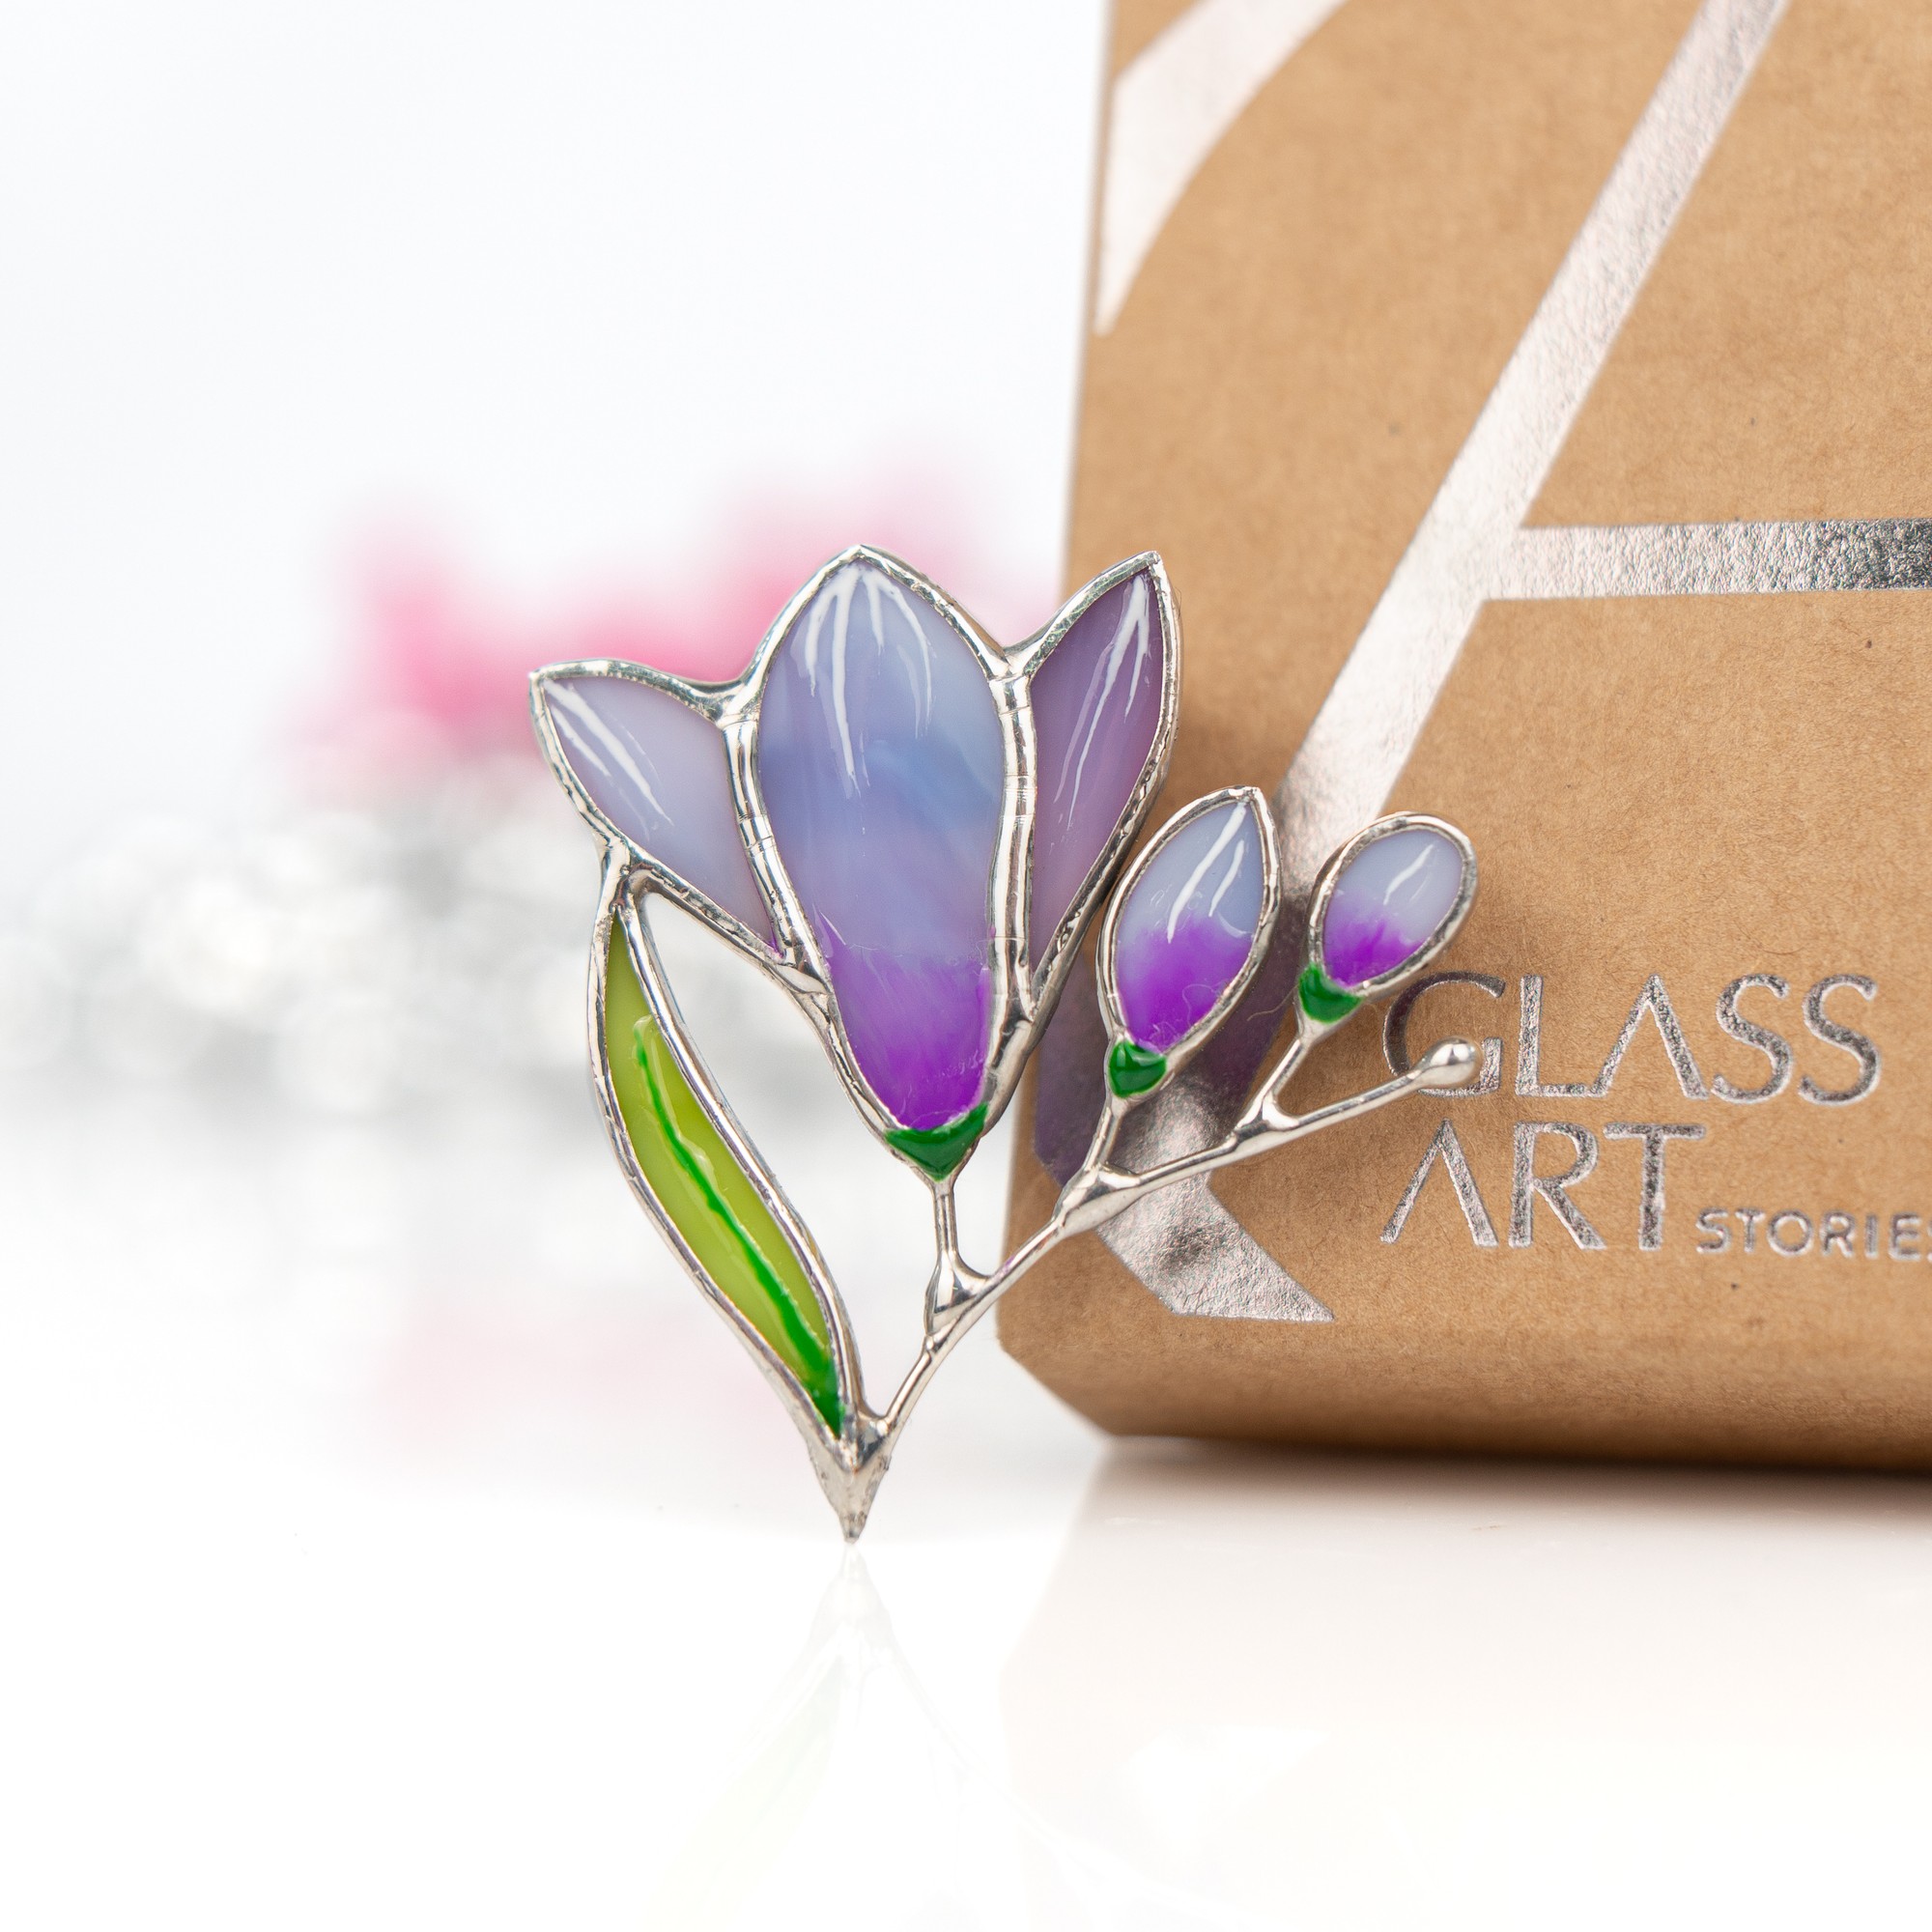 Freesia bouquet stained glass jewelry